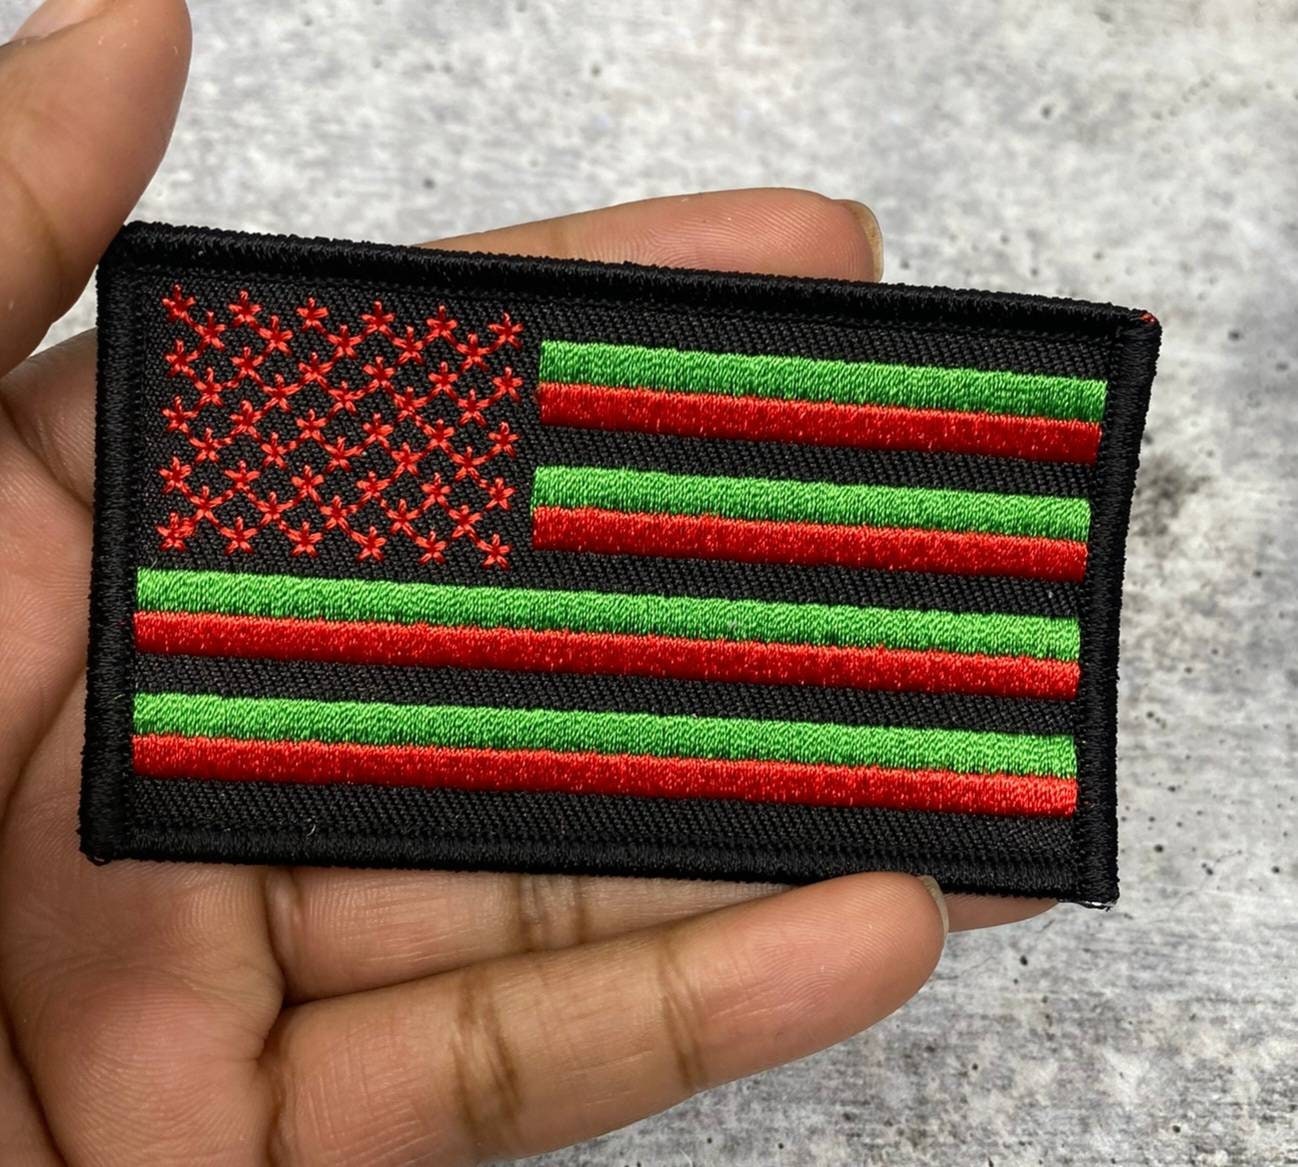 EXCLUSIVE,"RGB Flag" Iron-On 100% Embroidered Patch; Juneteenth, Marcus Garvey, Unia Flag, 3.5"x2", Patch for Hats, Jackets, Crocs